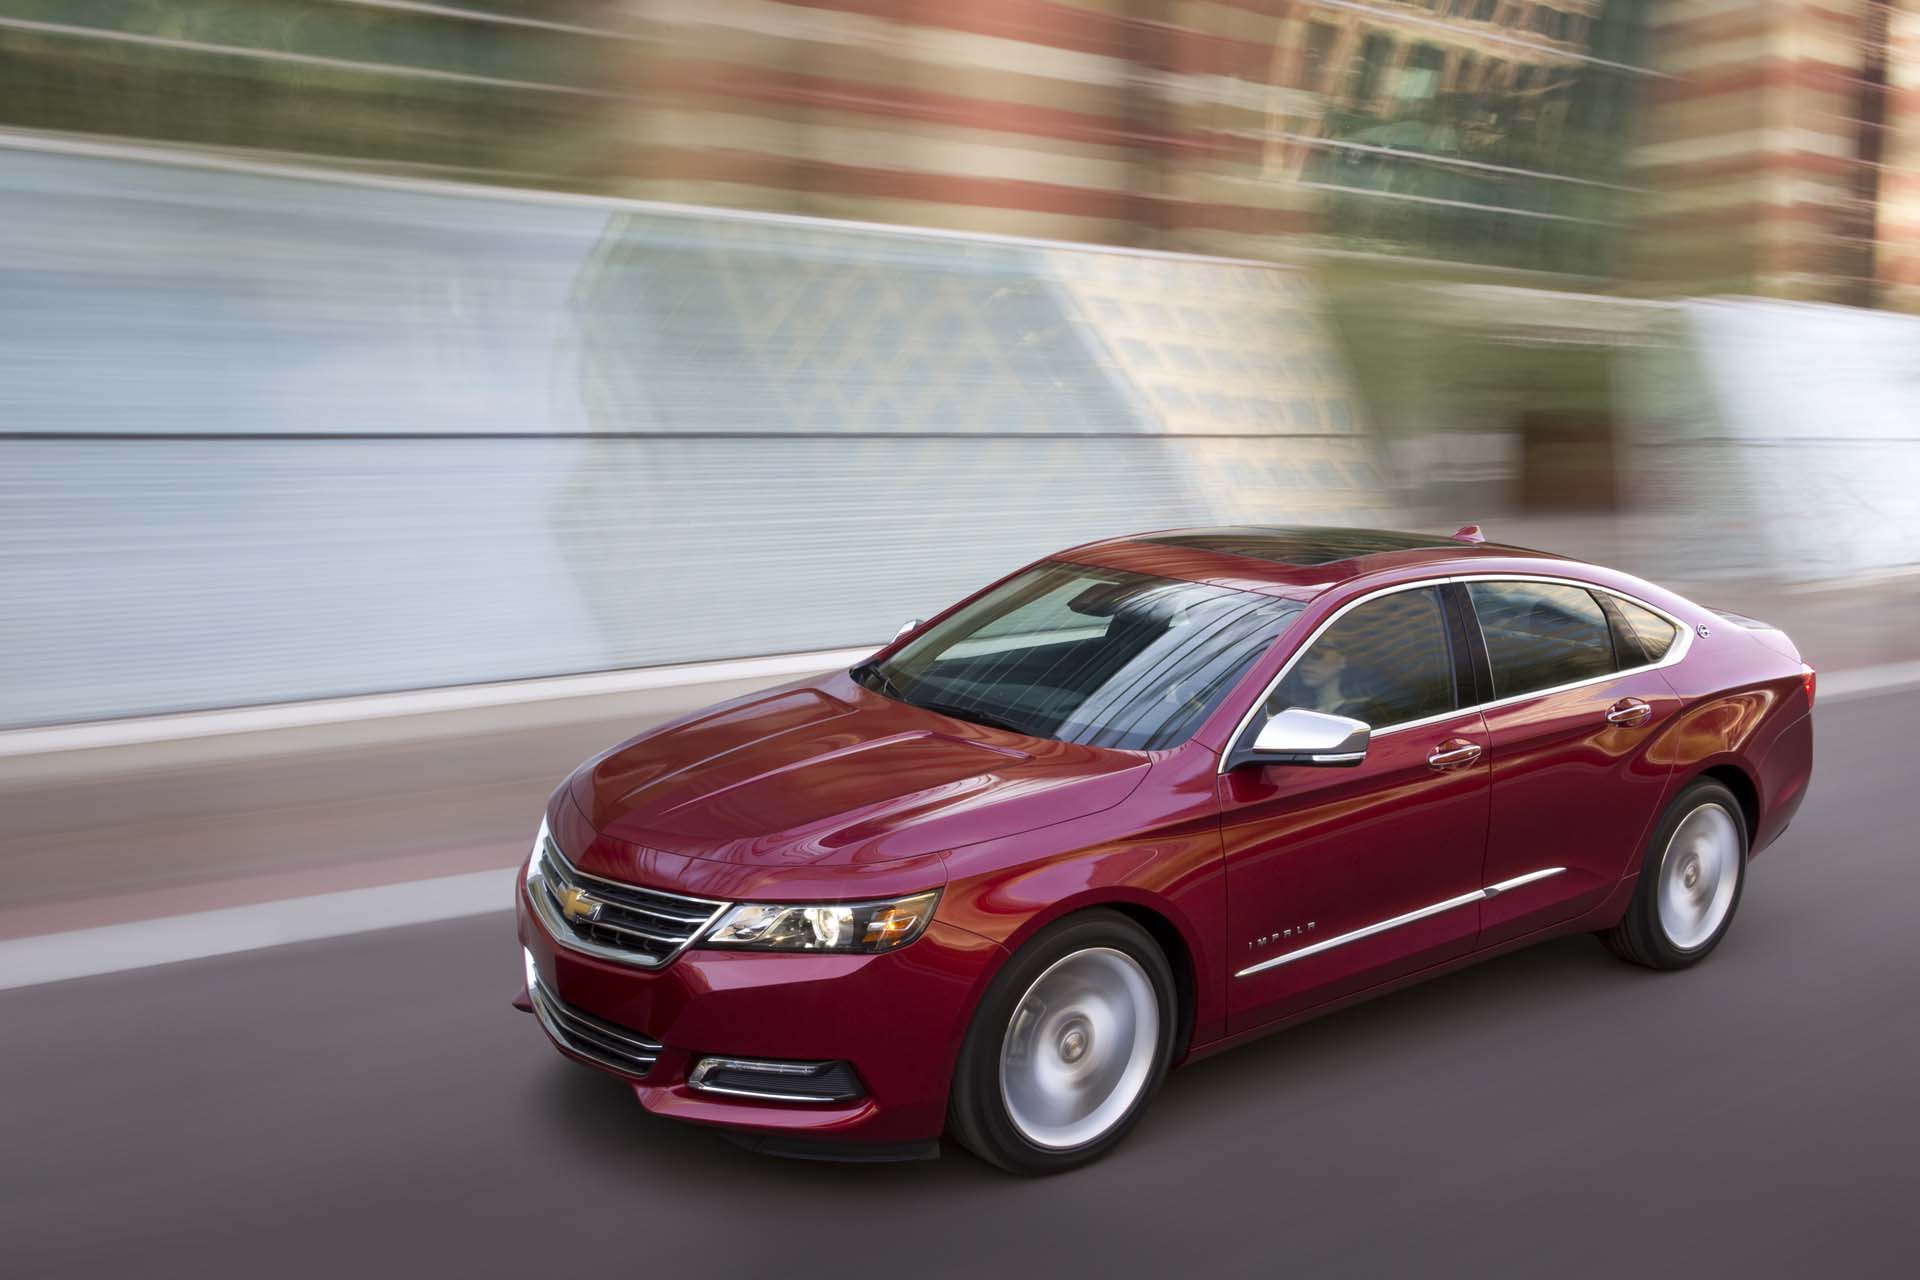 2018 Chevrolet Impala Chevy Gas Mileage The Car Connection